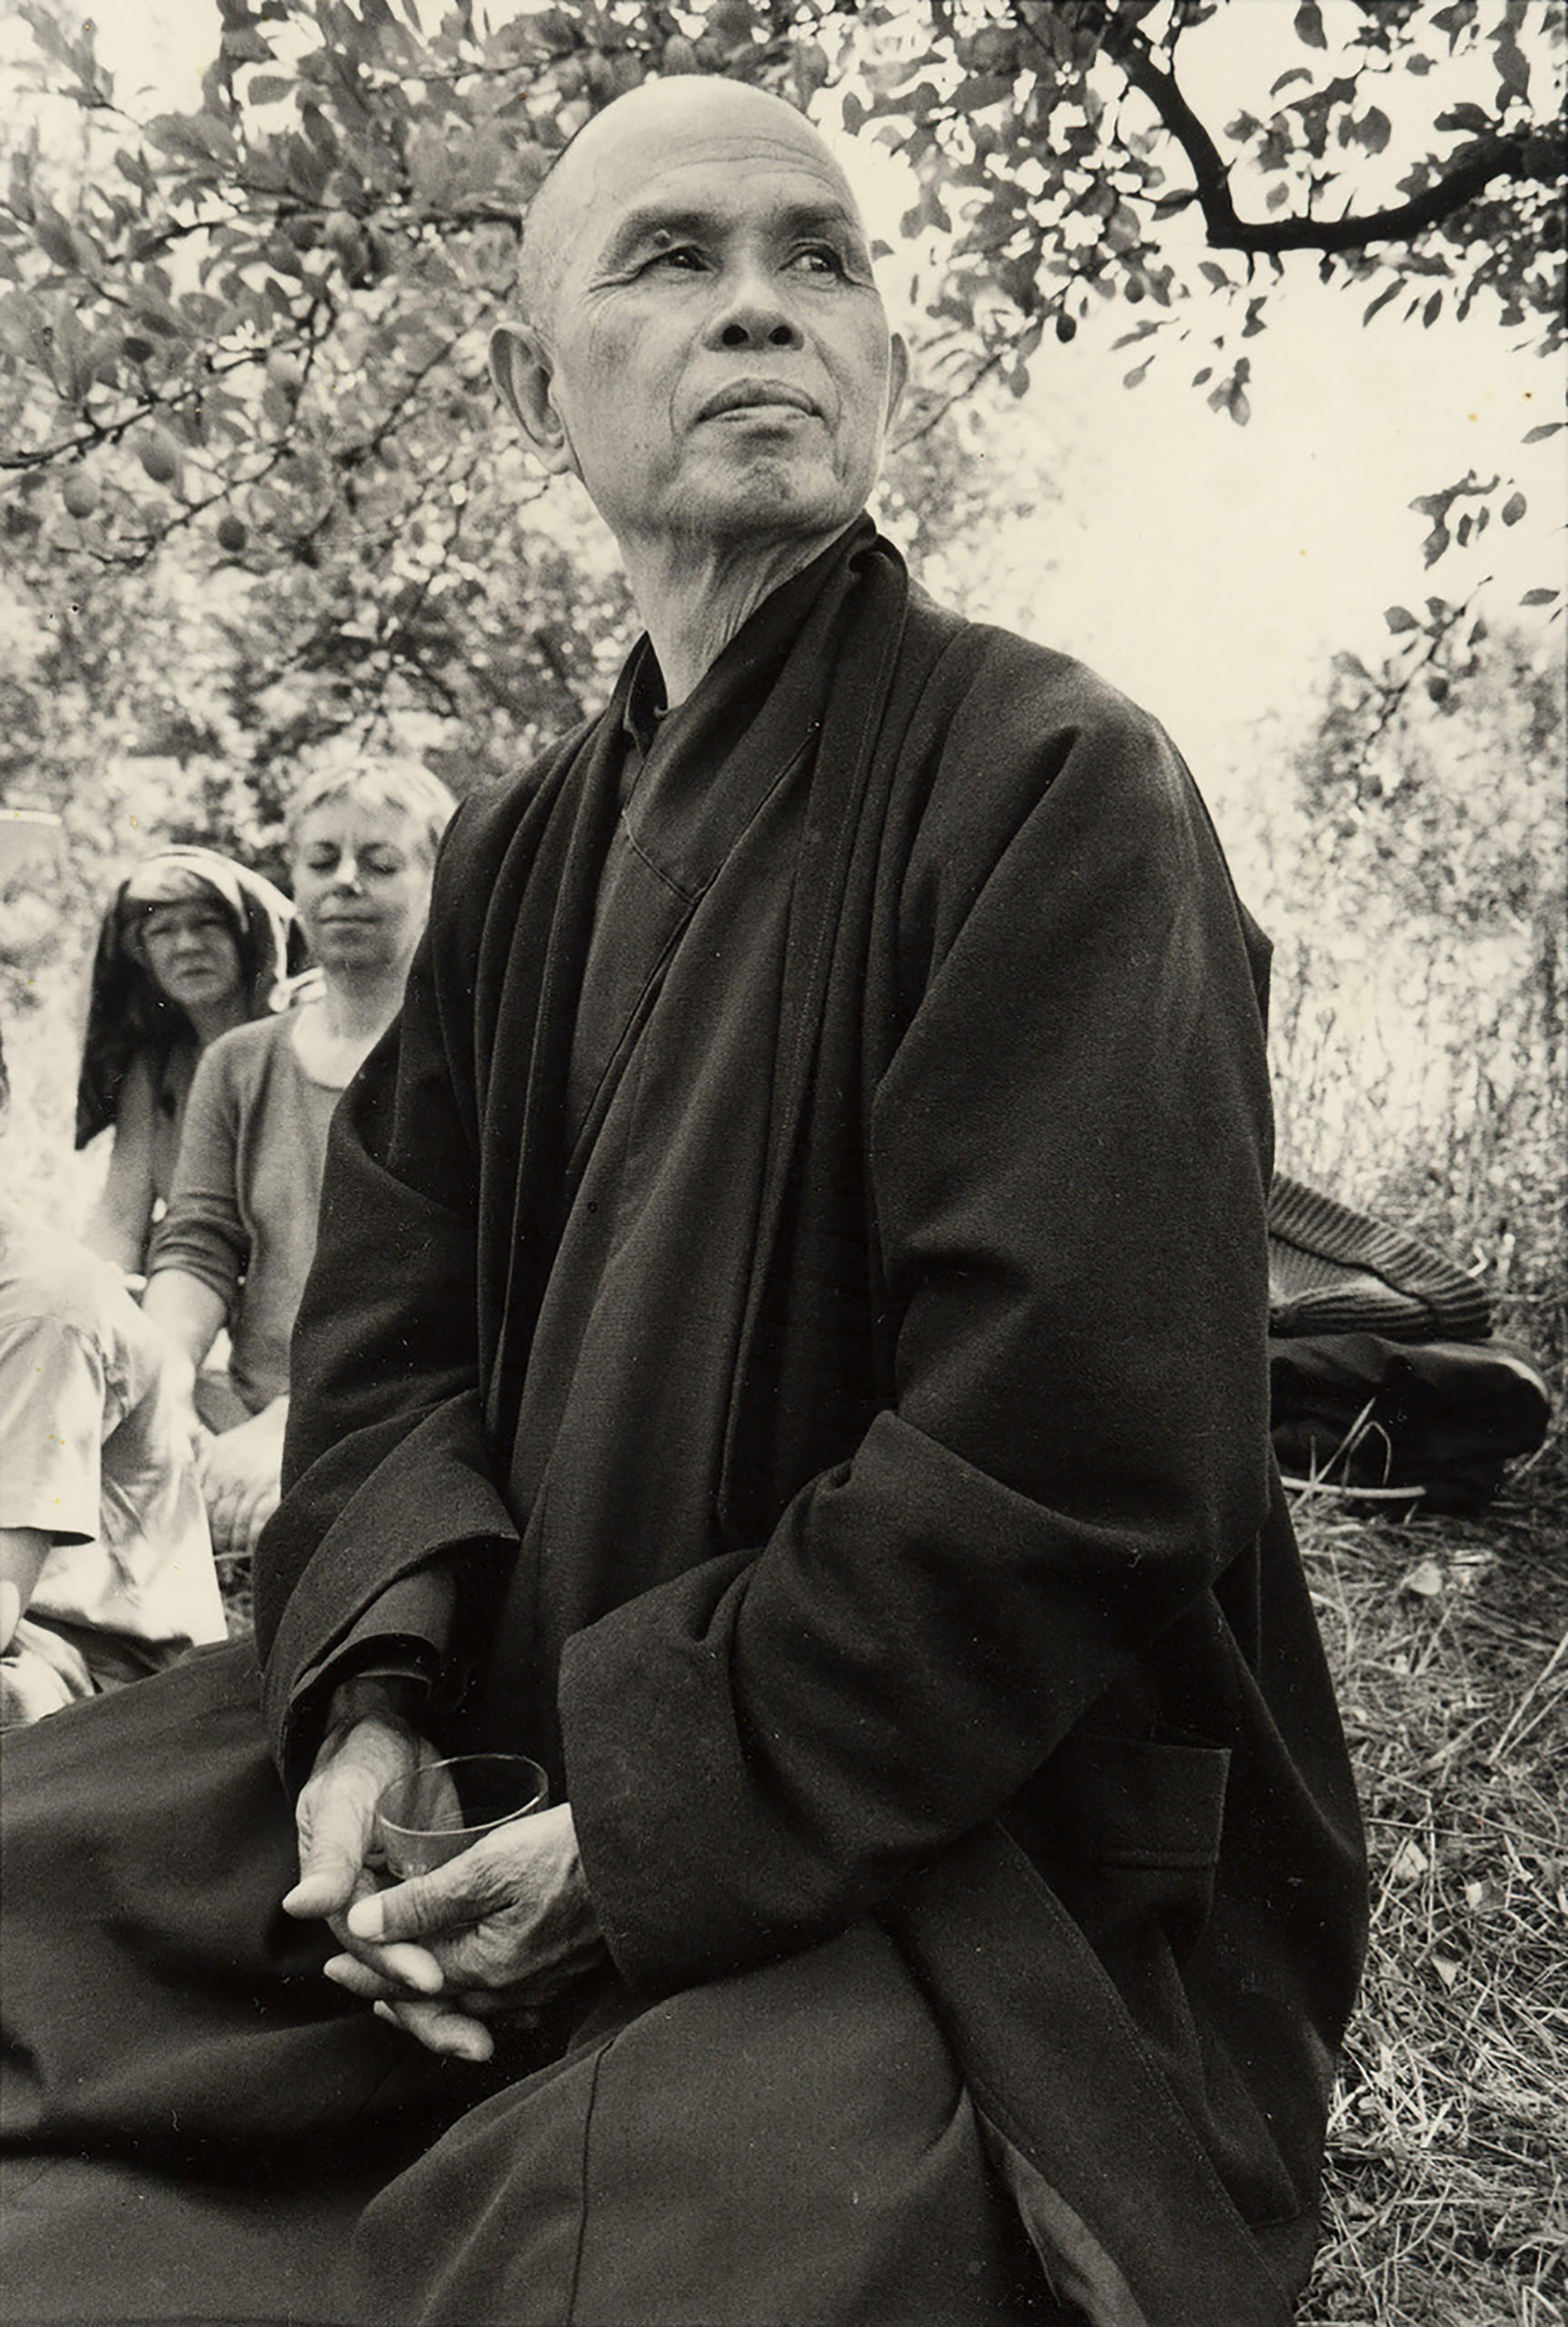 Thich Nhat Hanh, shown in an undated photo at his Plum Village monastery in France, introduced ways to meditate that anyone could master